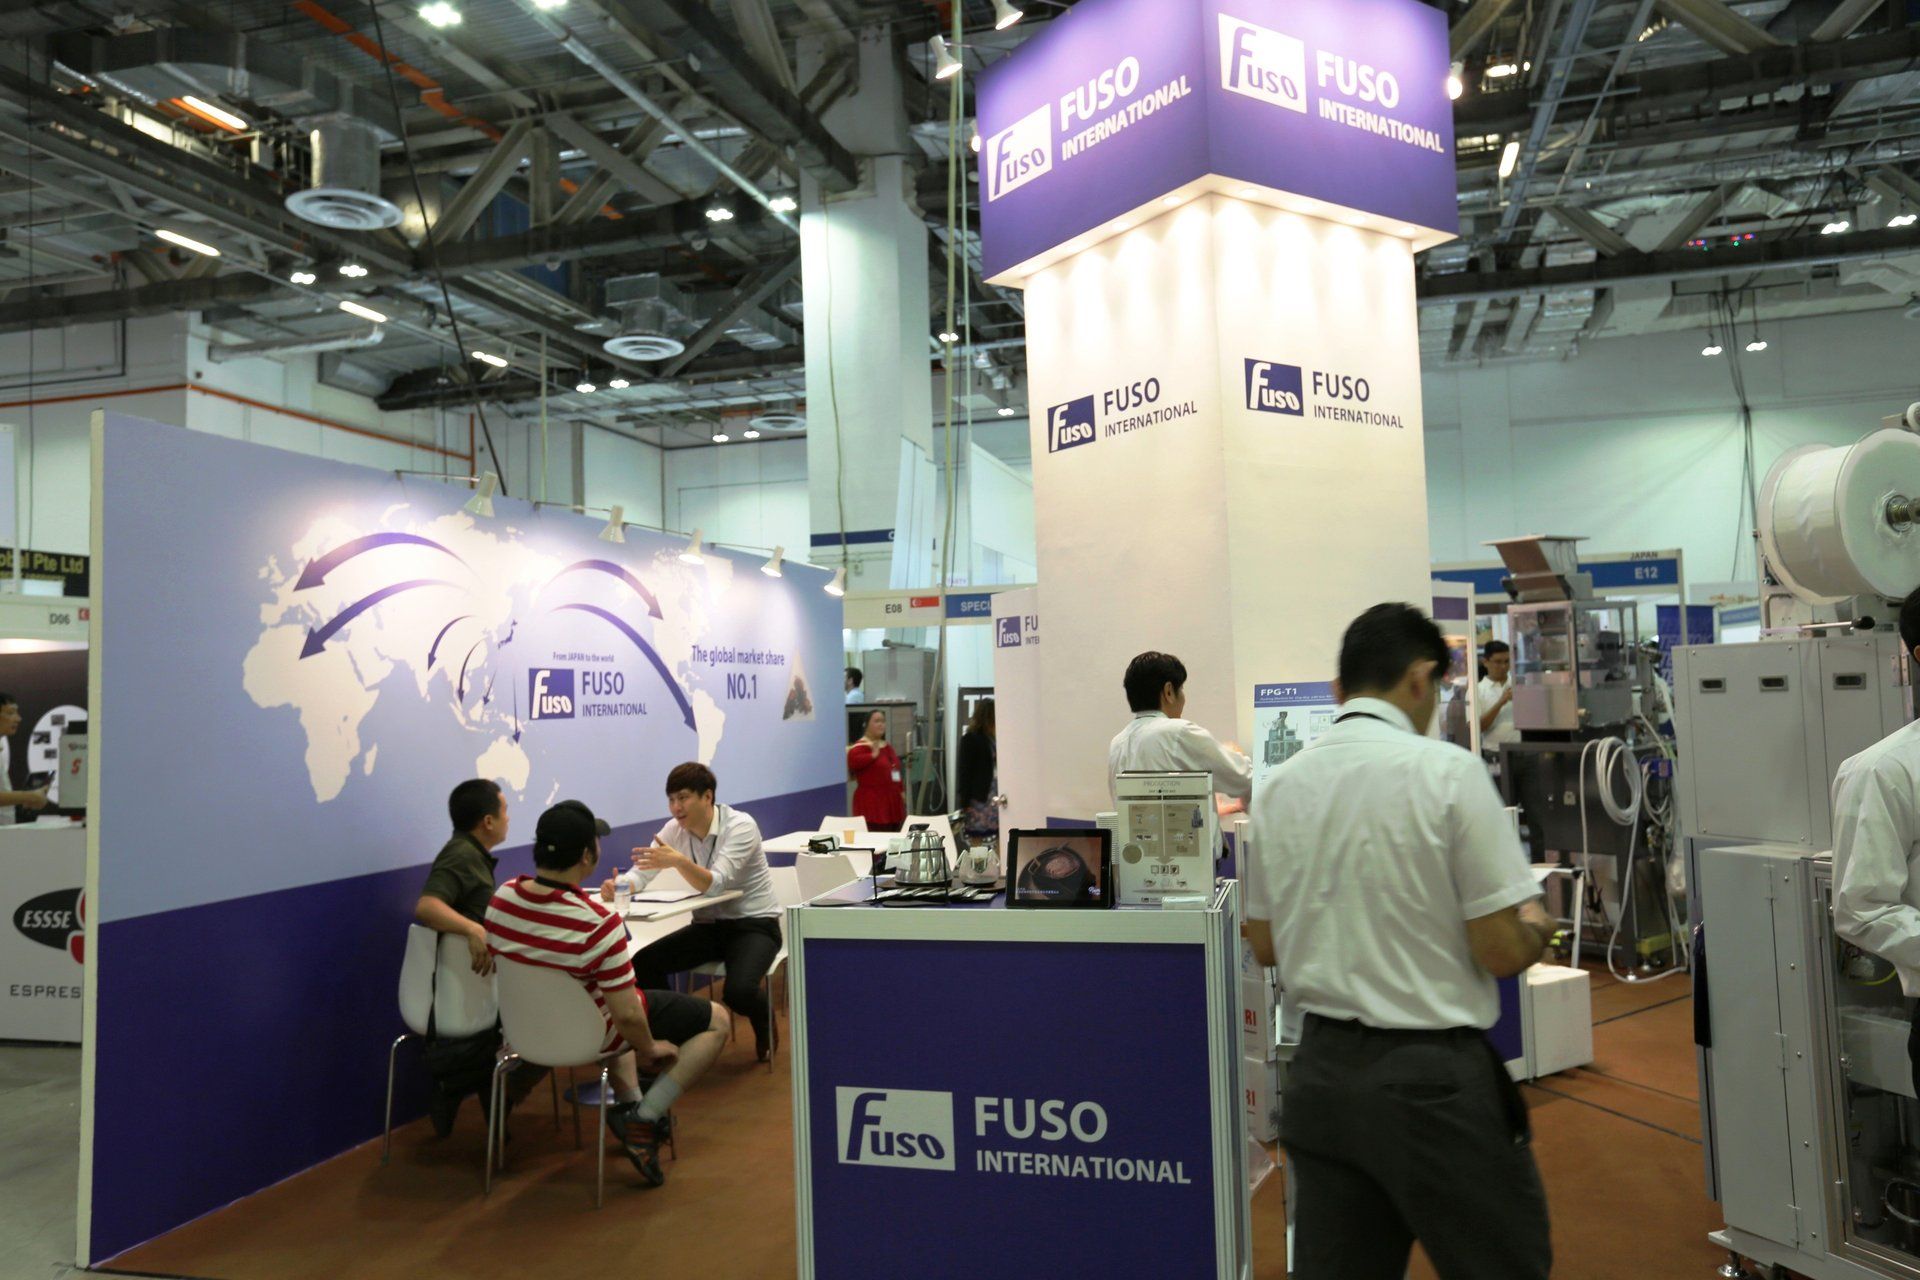 Fuso International @ Cafe Asia 2016. Booth designed and built by Essential Global Fairs.